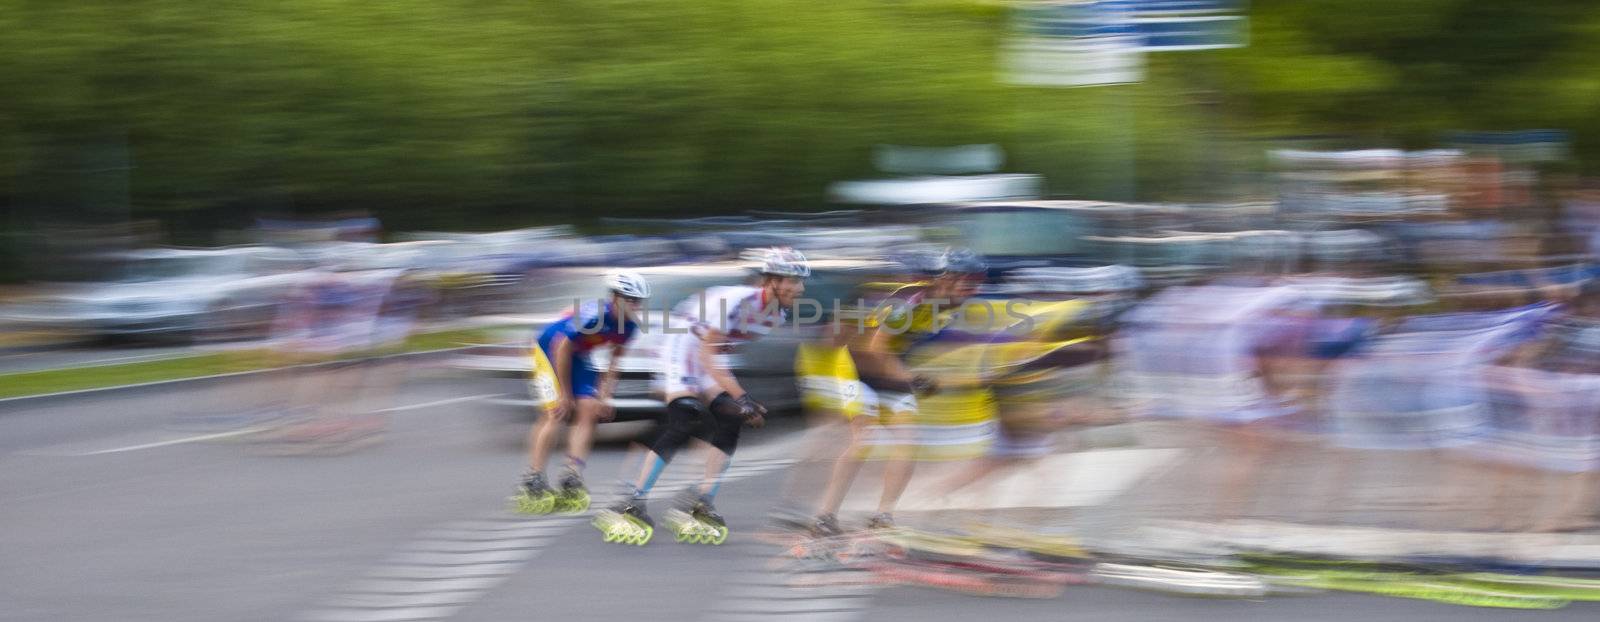 motion blur of skating men in a road race